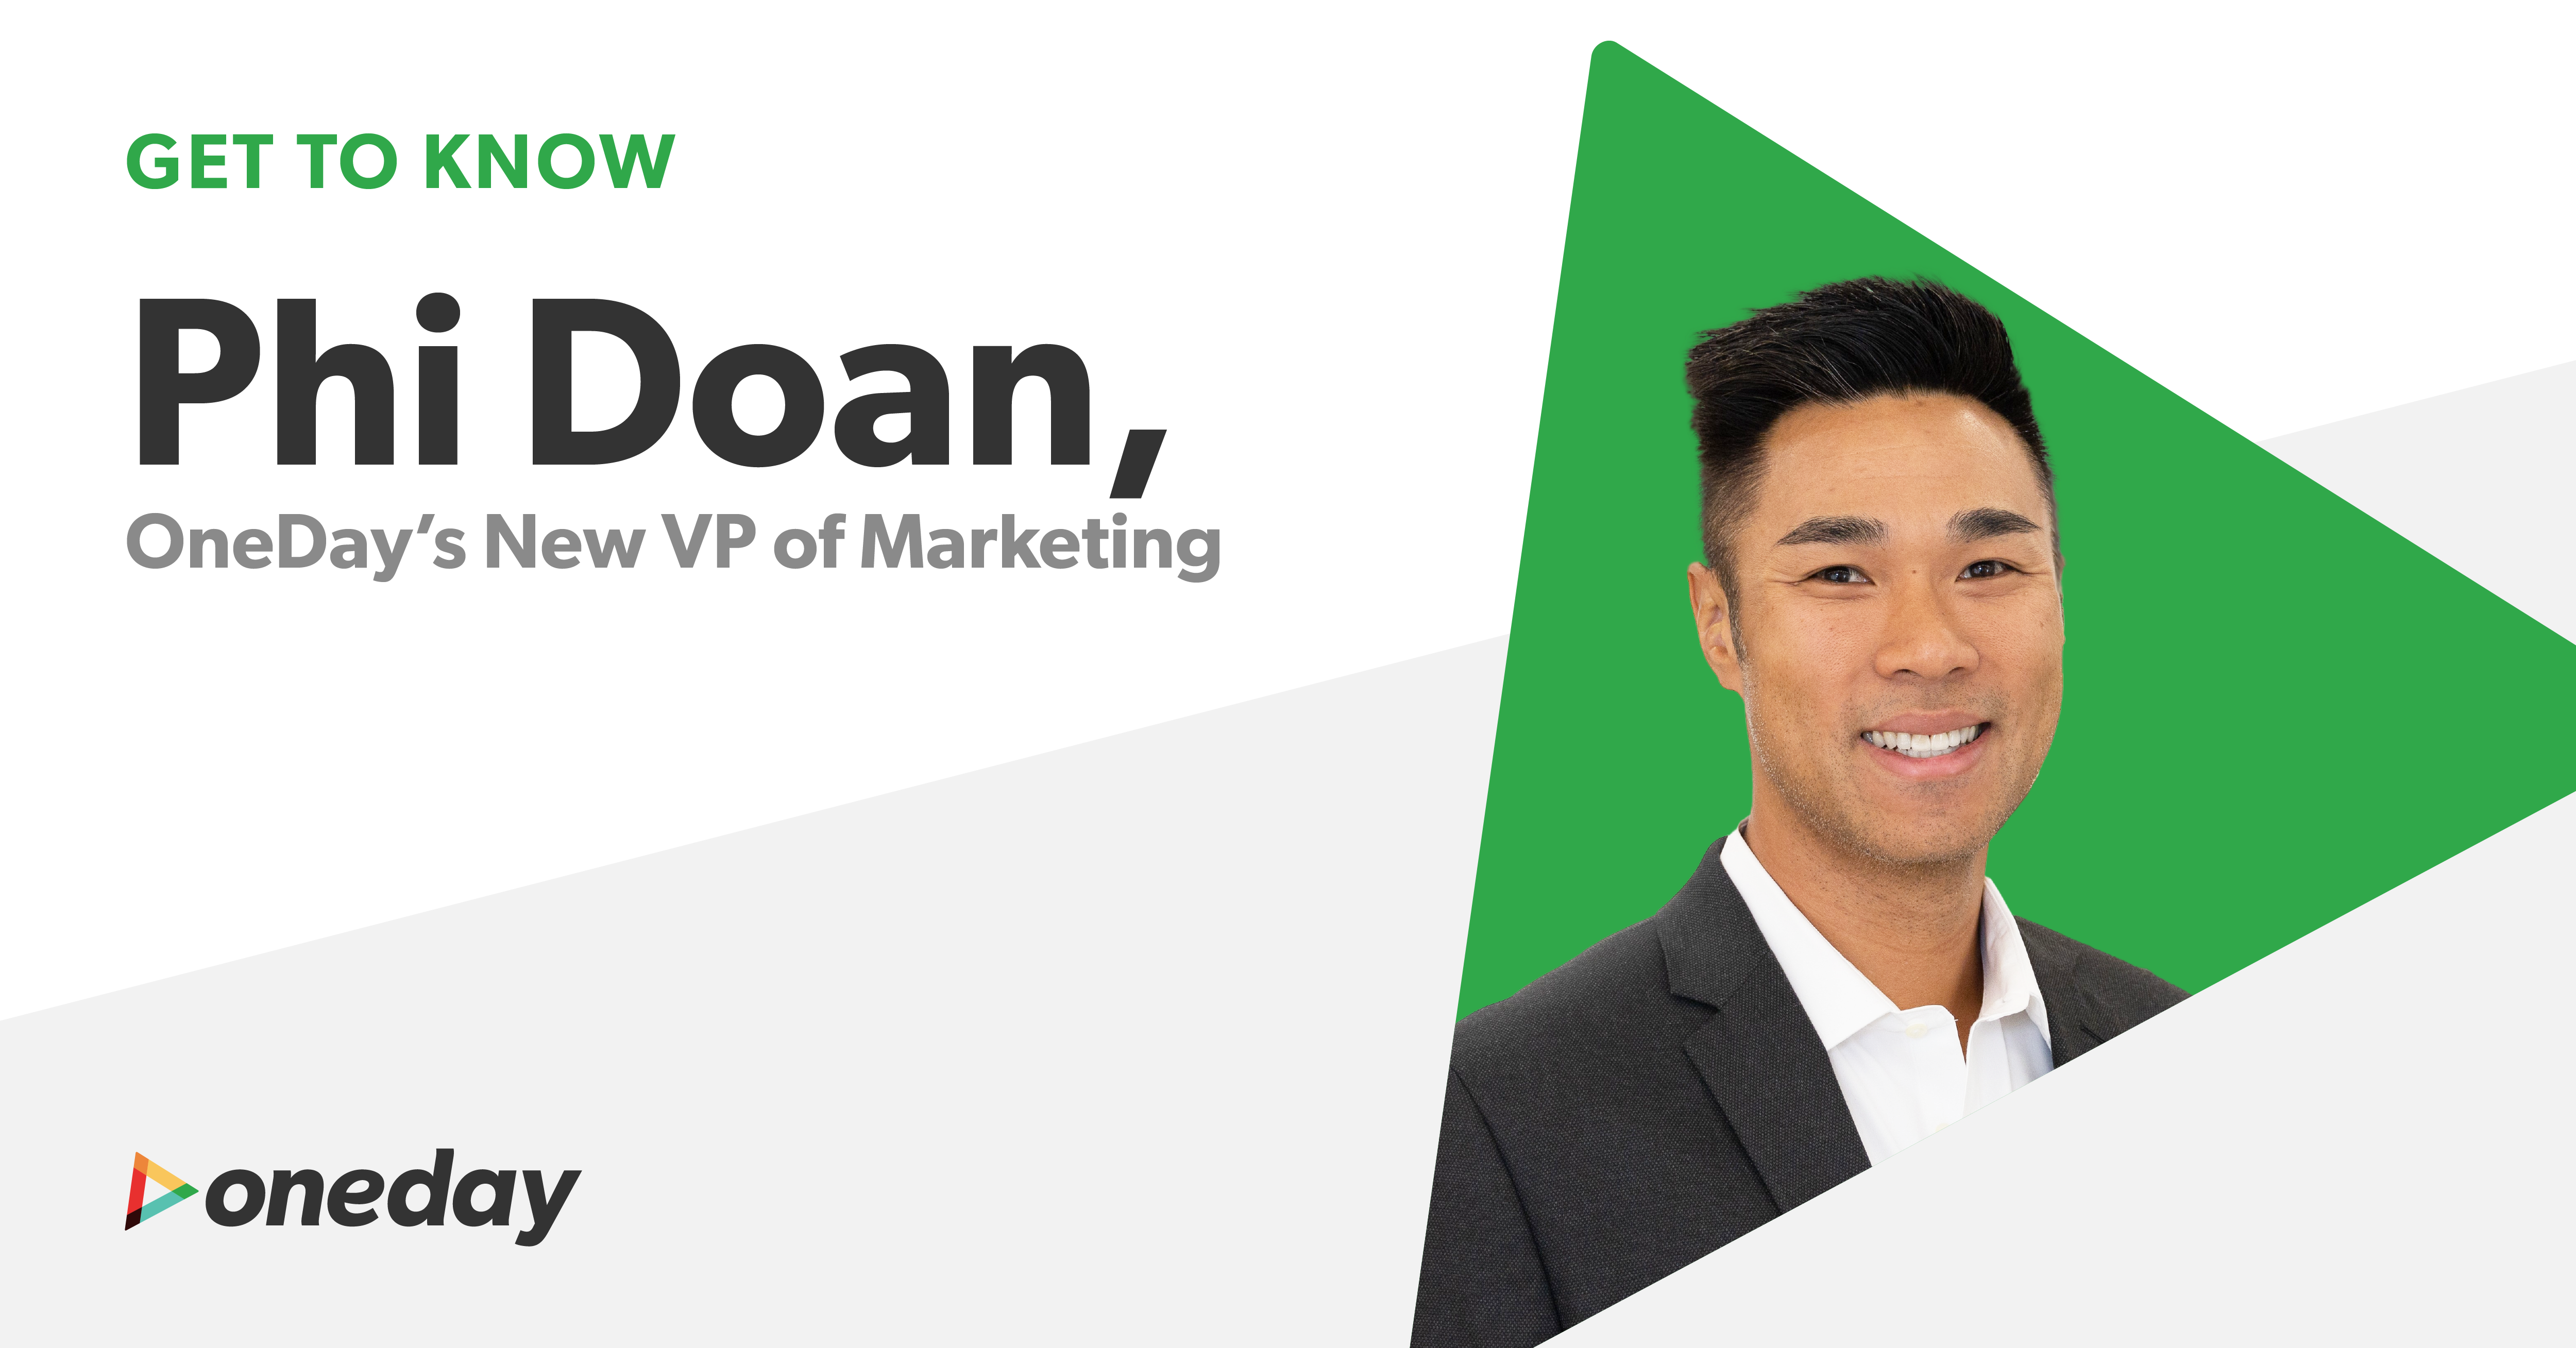 Meet Phi Doan, OneDay’s new VP of Marketing, and the ideal combination of experience, skill, and mindset he’s infusing across our entire organization.